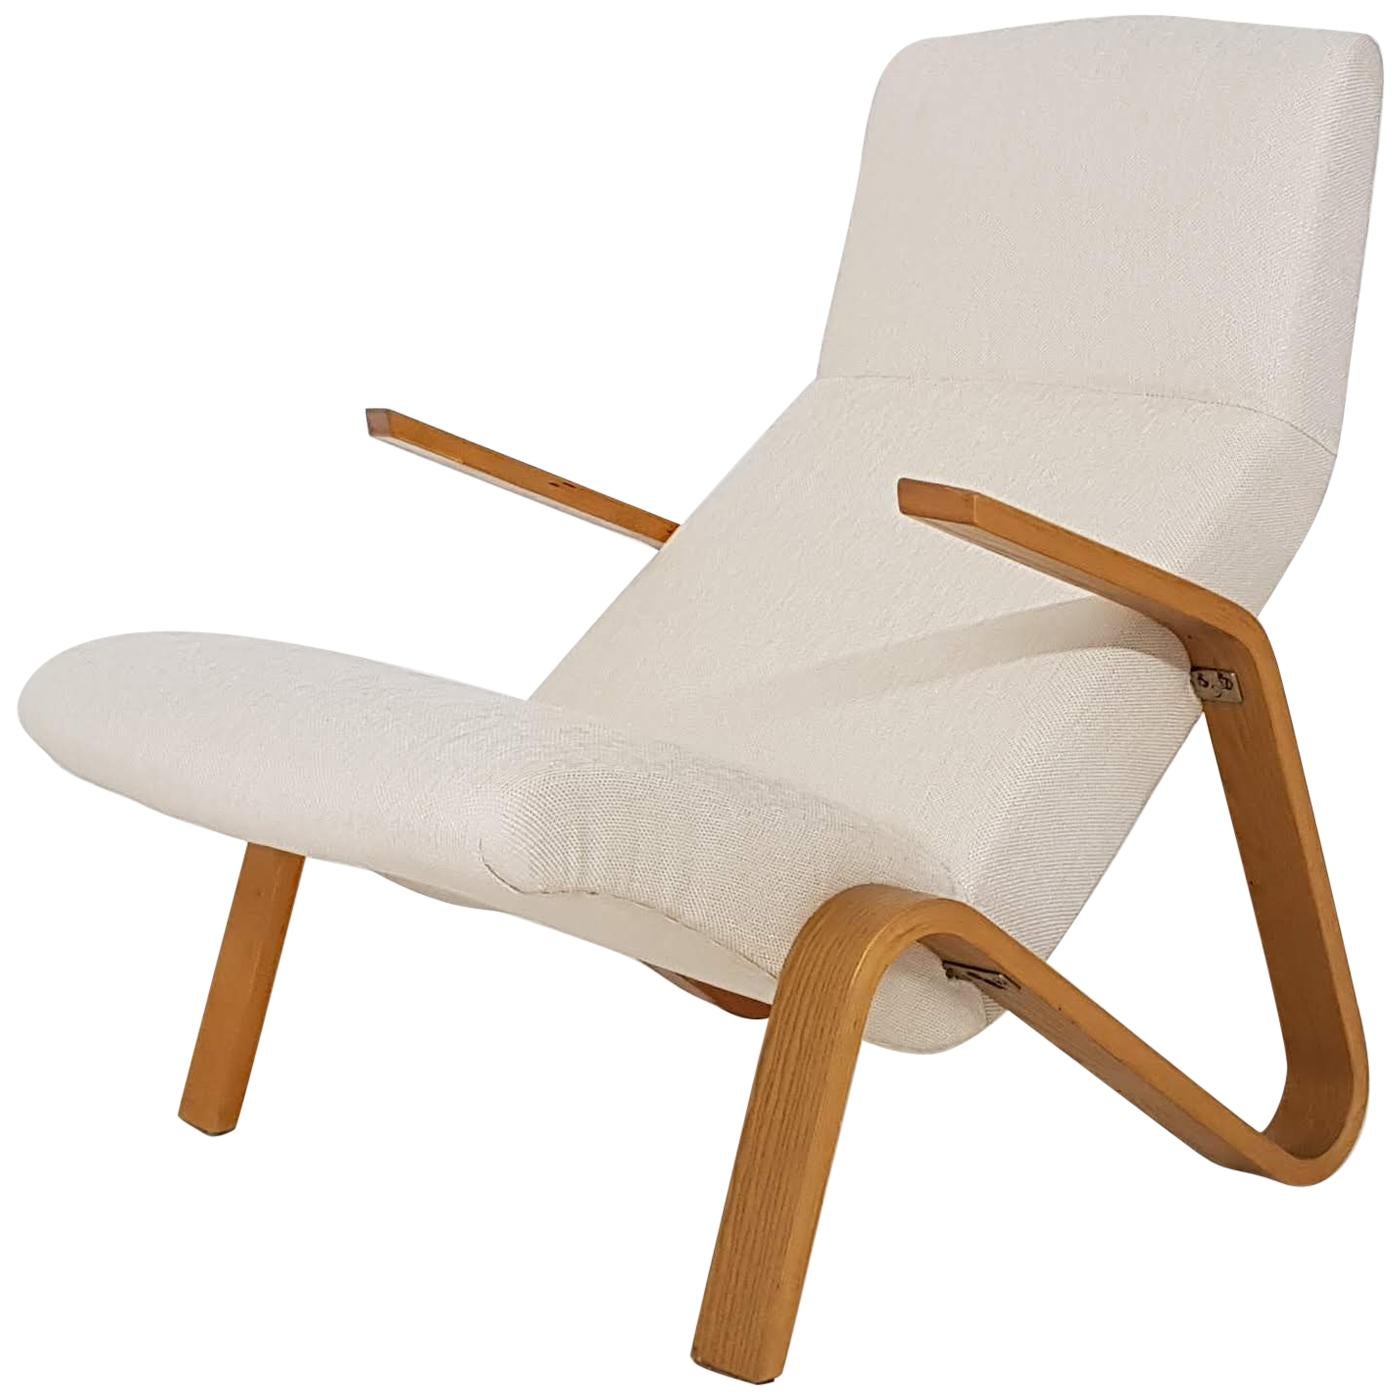 Beautiful original lounge chair with bentwood birch frame and new white teddy upholstery and filling by Eero Saarinen for Knoll Associates.

Eero Saarinen is one of the most iconic and recognized designers from the mid-century. He was a